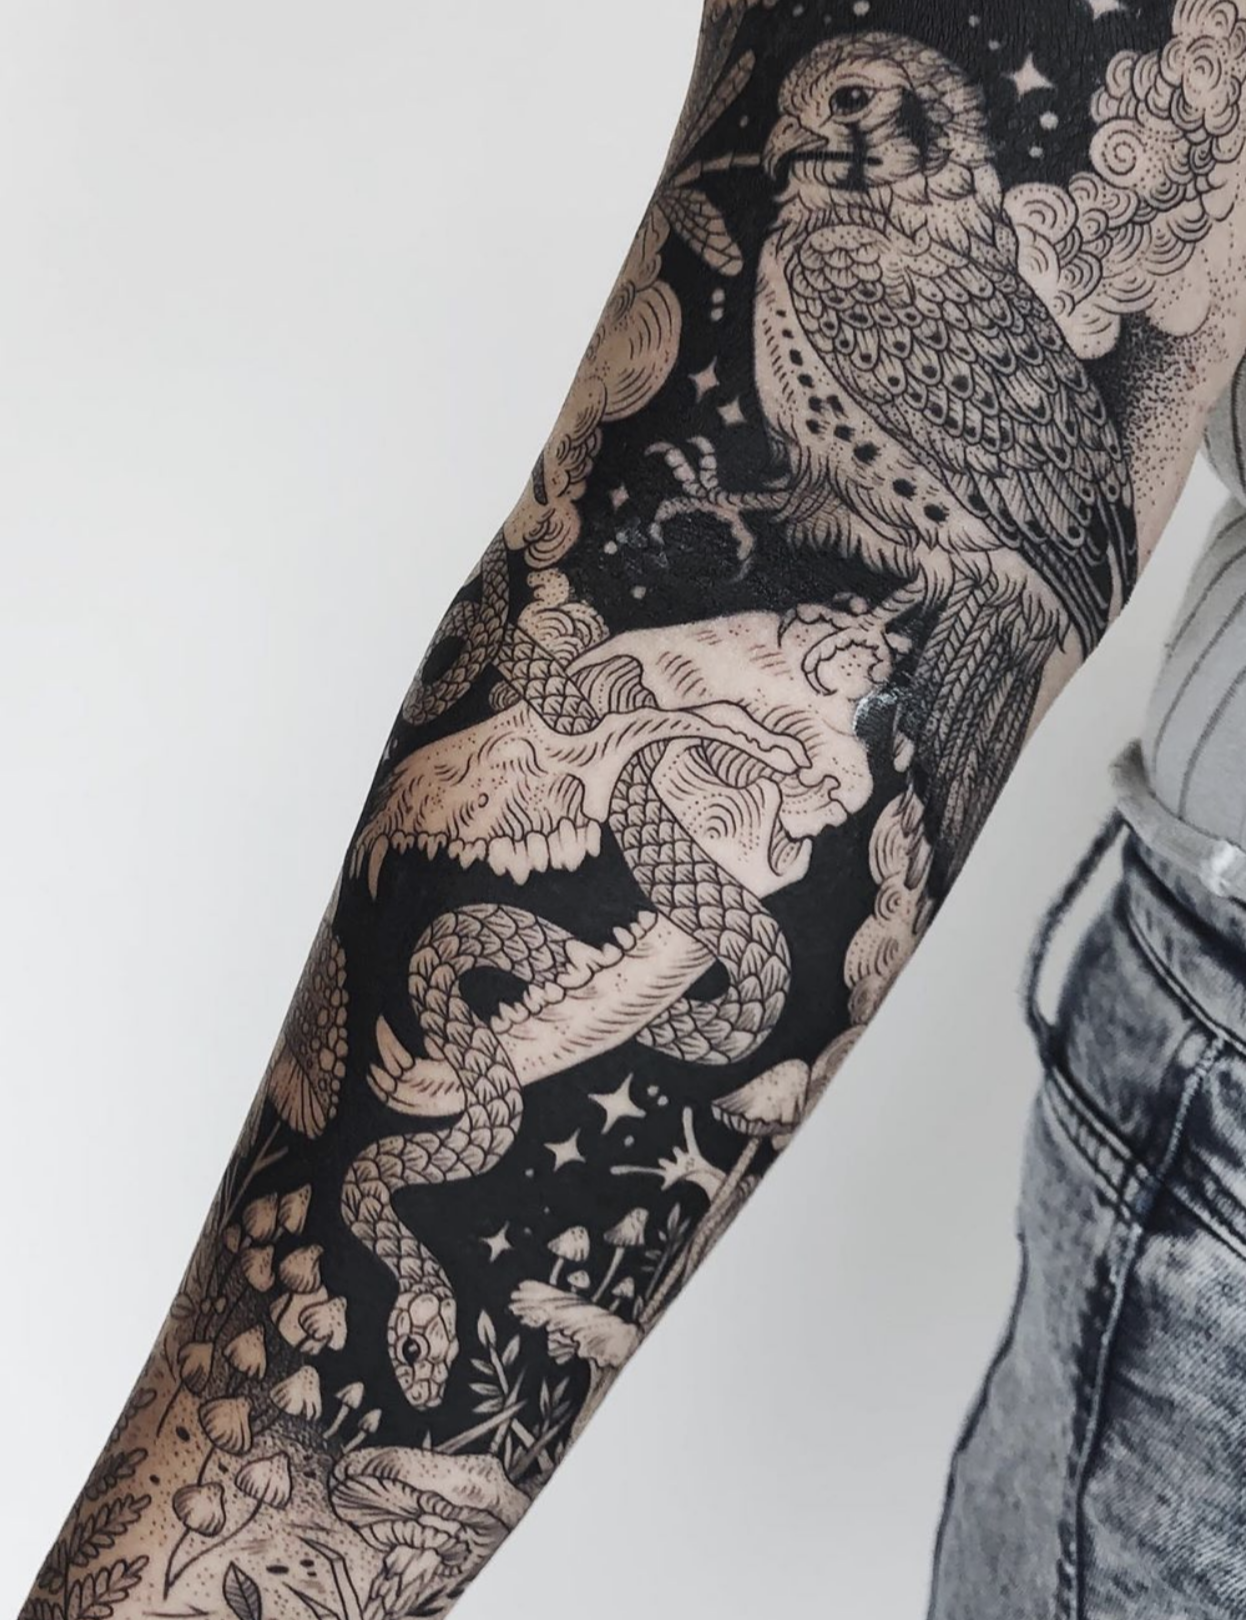 How long does a tattoo take? — Tenderfoot Studio